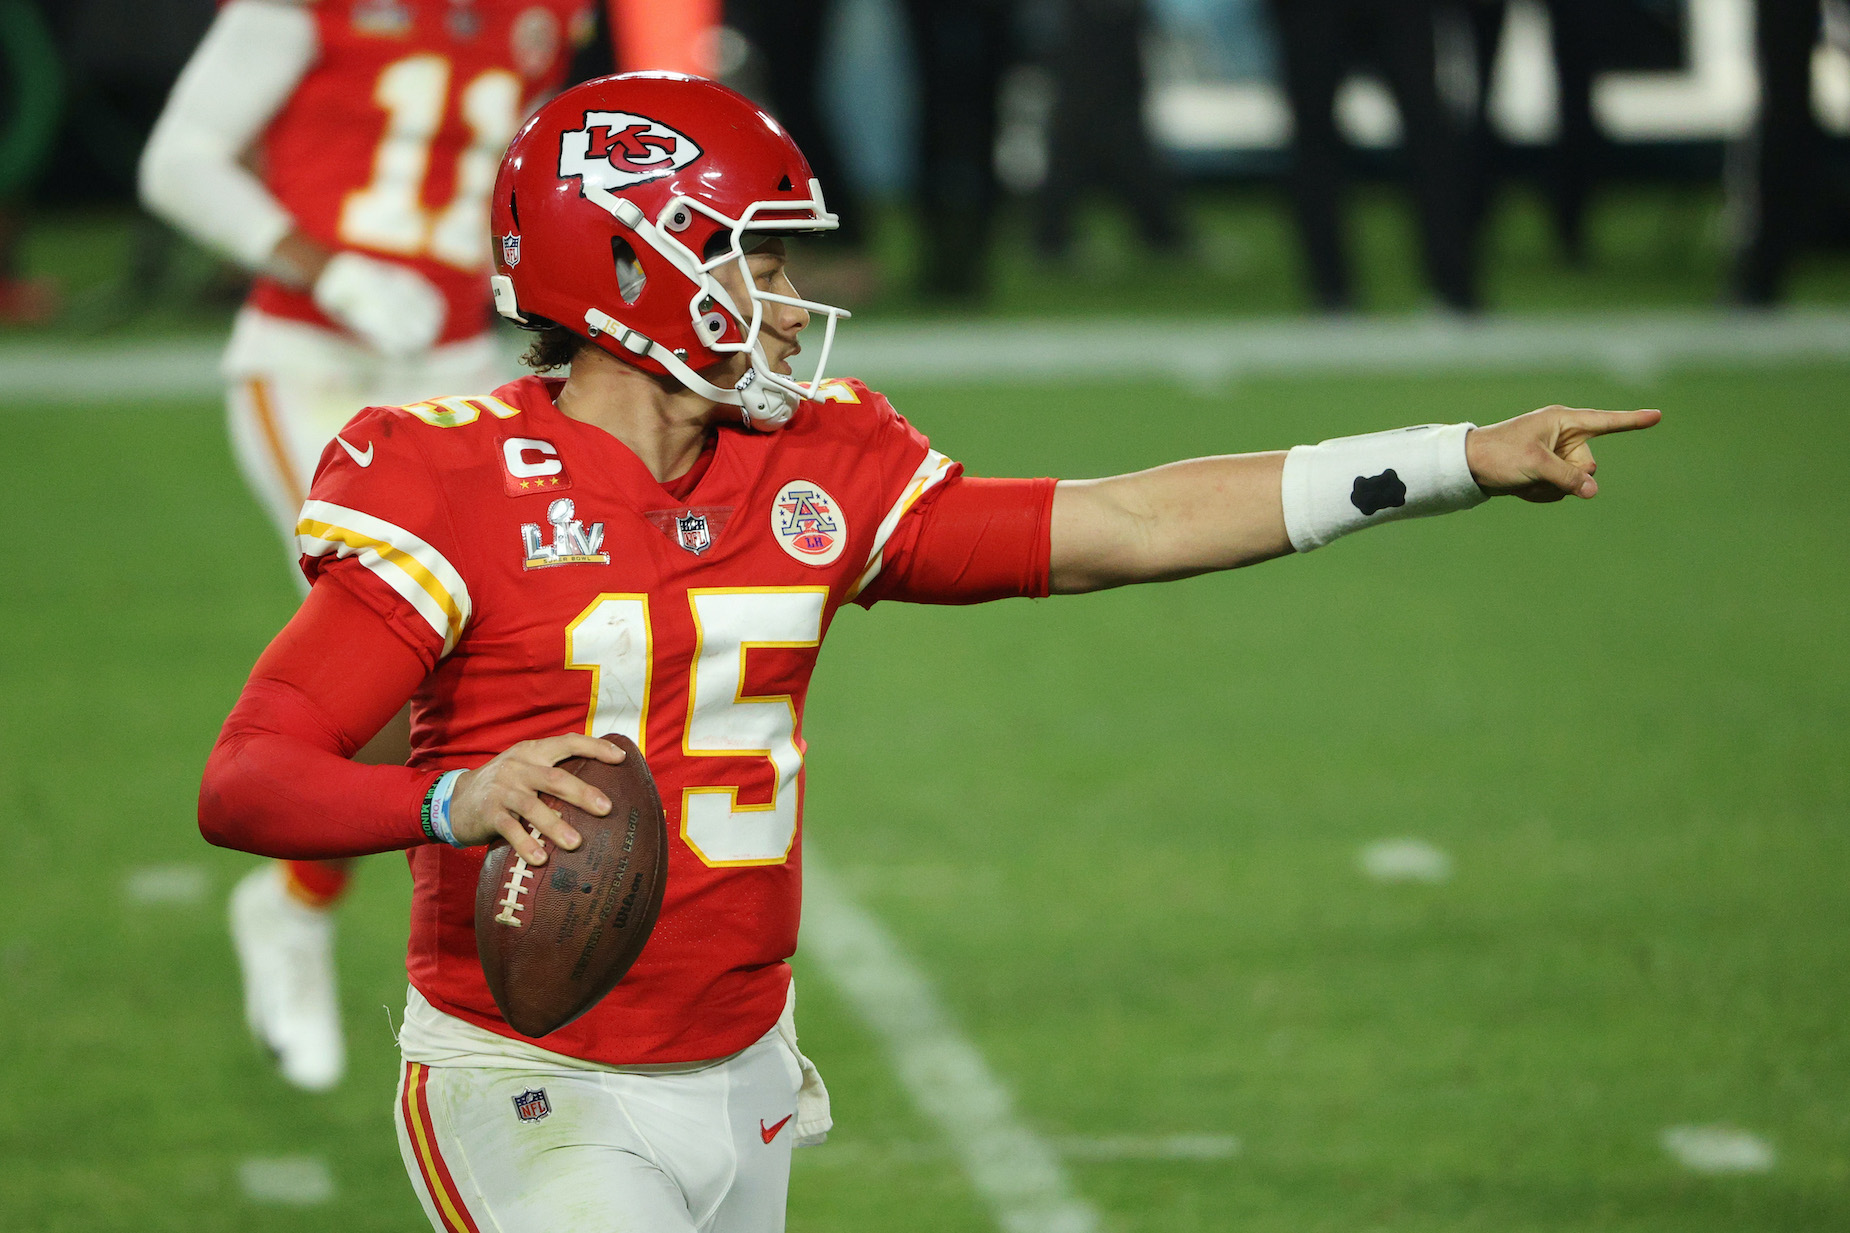 Patrick Mahomes points downfield during the Kansas City Chiefs' Super Bowl 55 defeat.